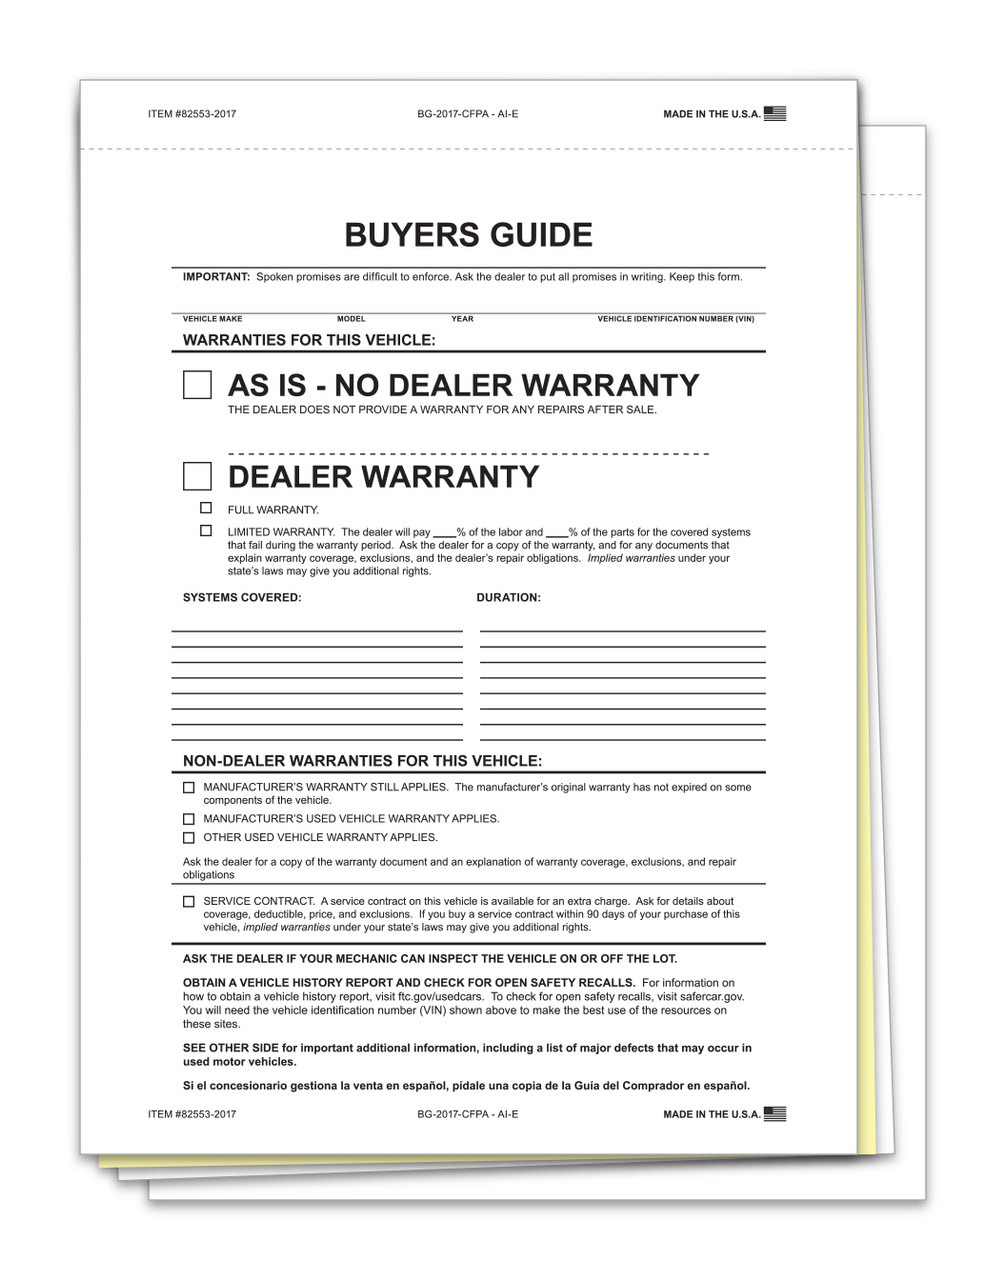 Interior Buyers Guide - BG-2017- As Is - 3 Part, Paper/PA - Qty. 100